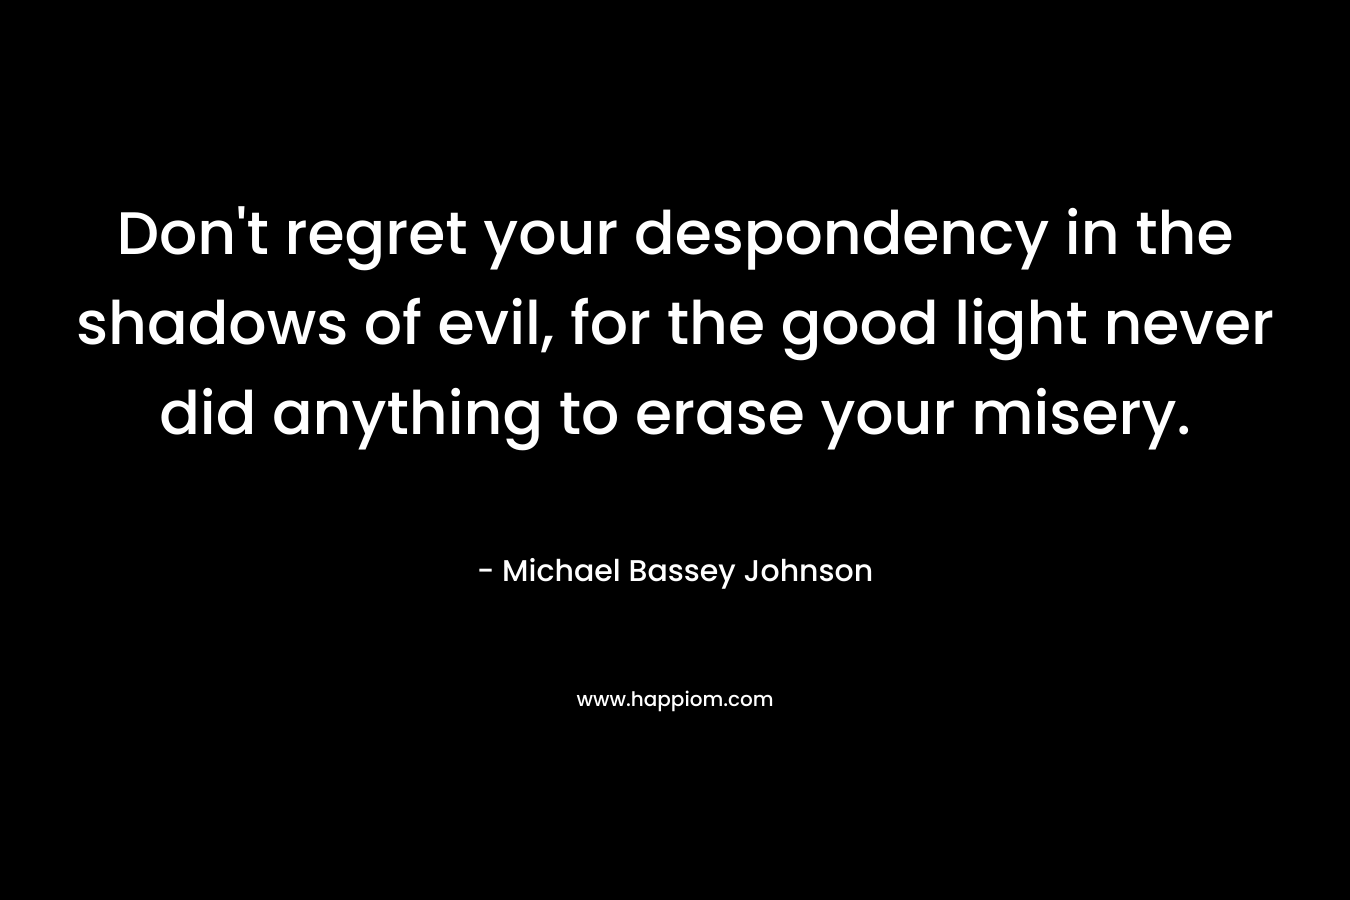 Don't regret your despondency in the shadows of evil, for the good light never did anything to erase your misery.